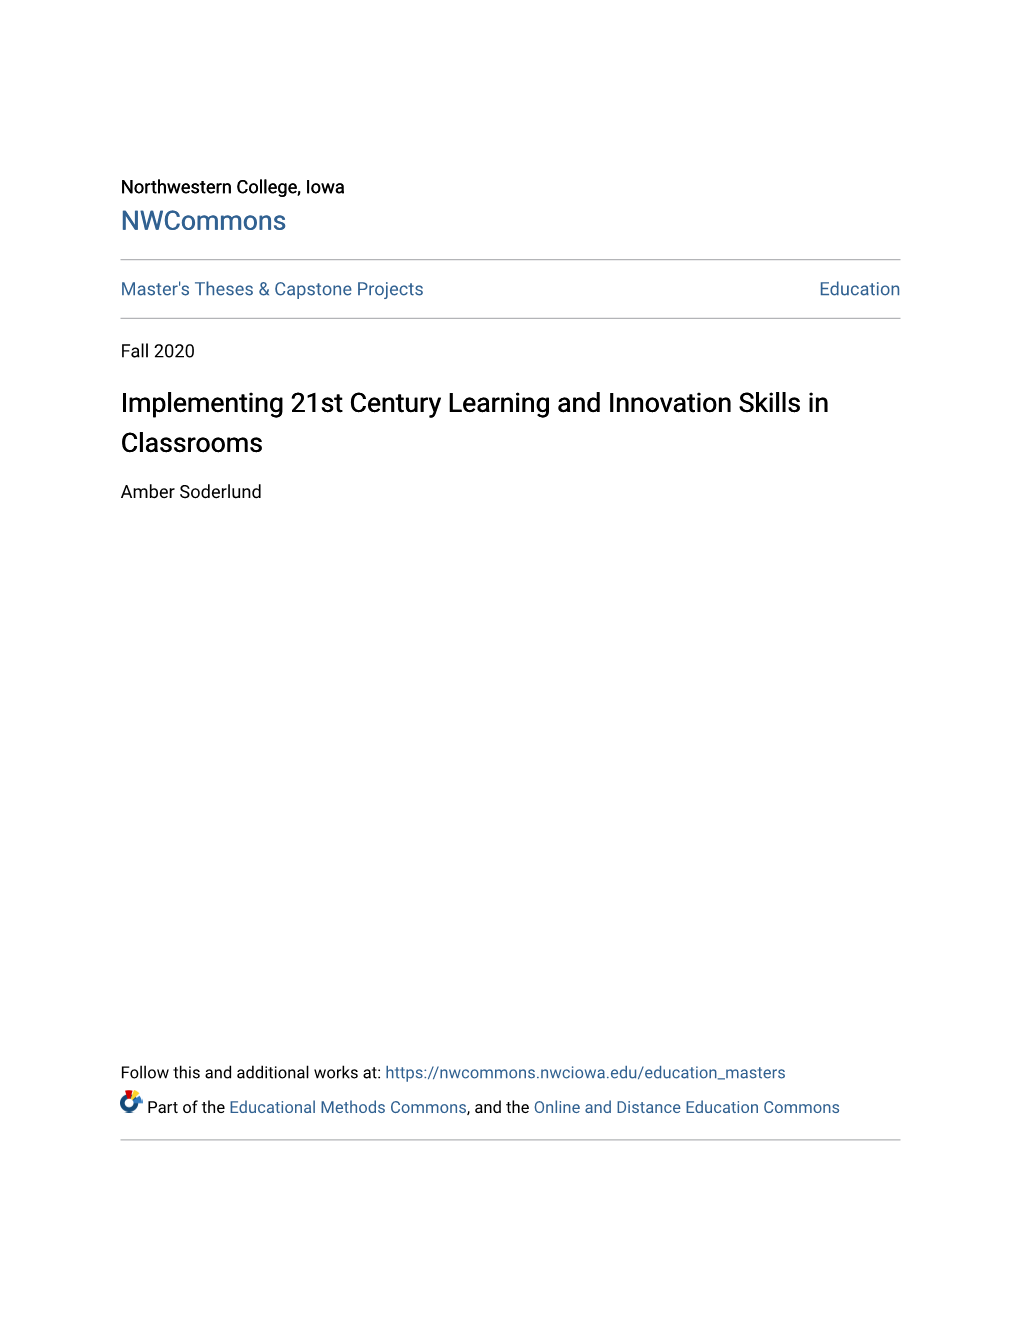 Implementing 21St Century Learning and Innovation Skills in Classrooms